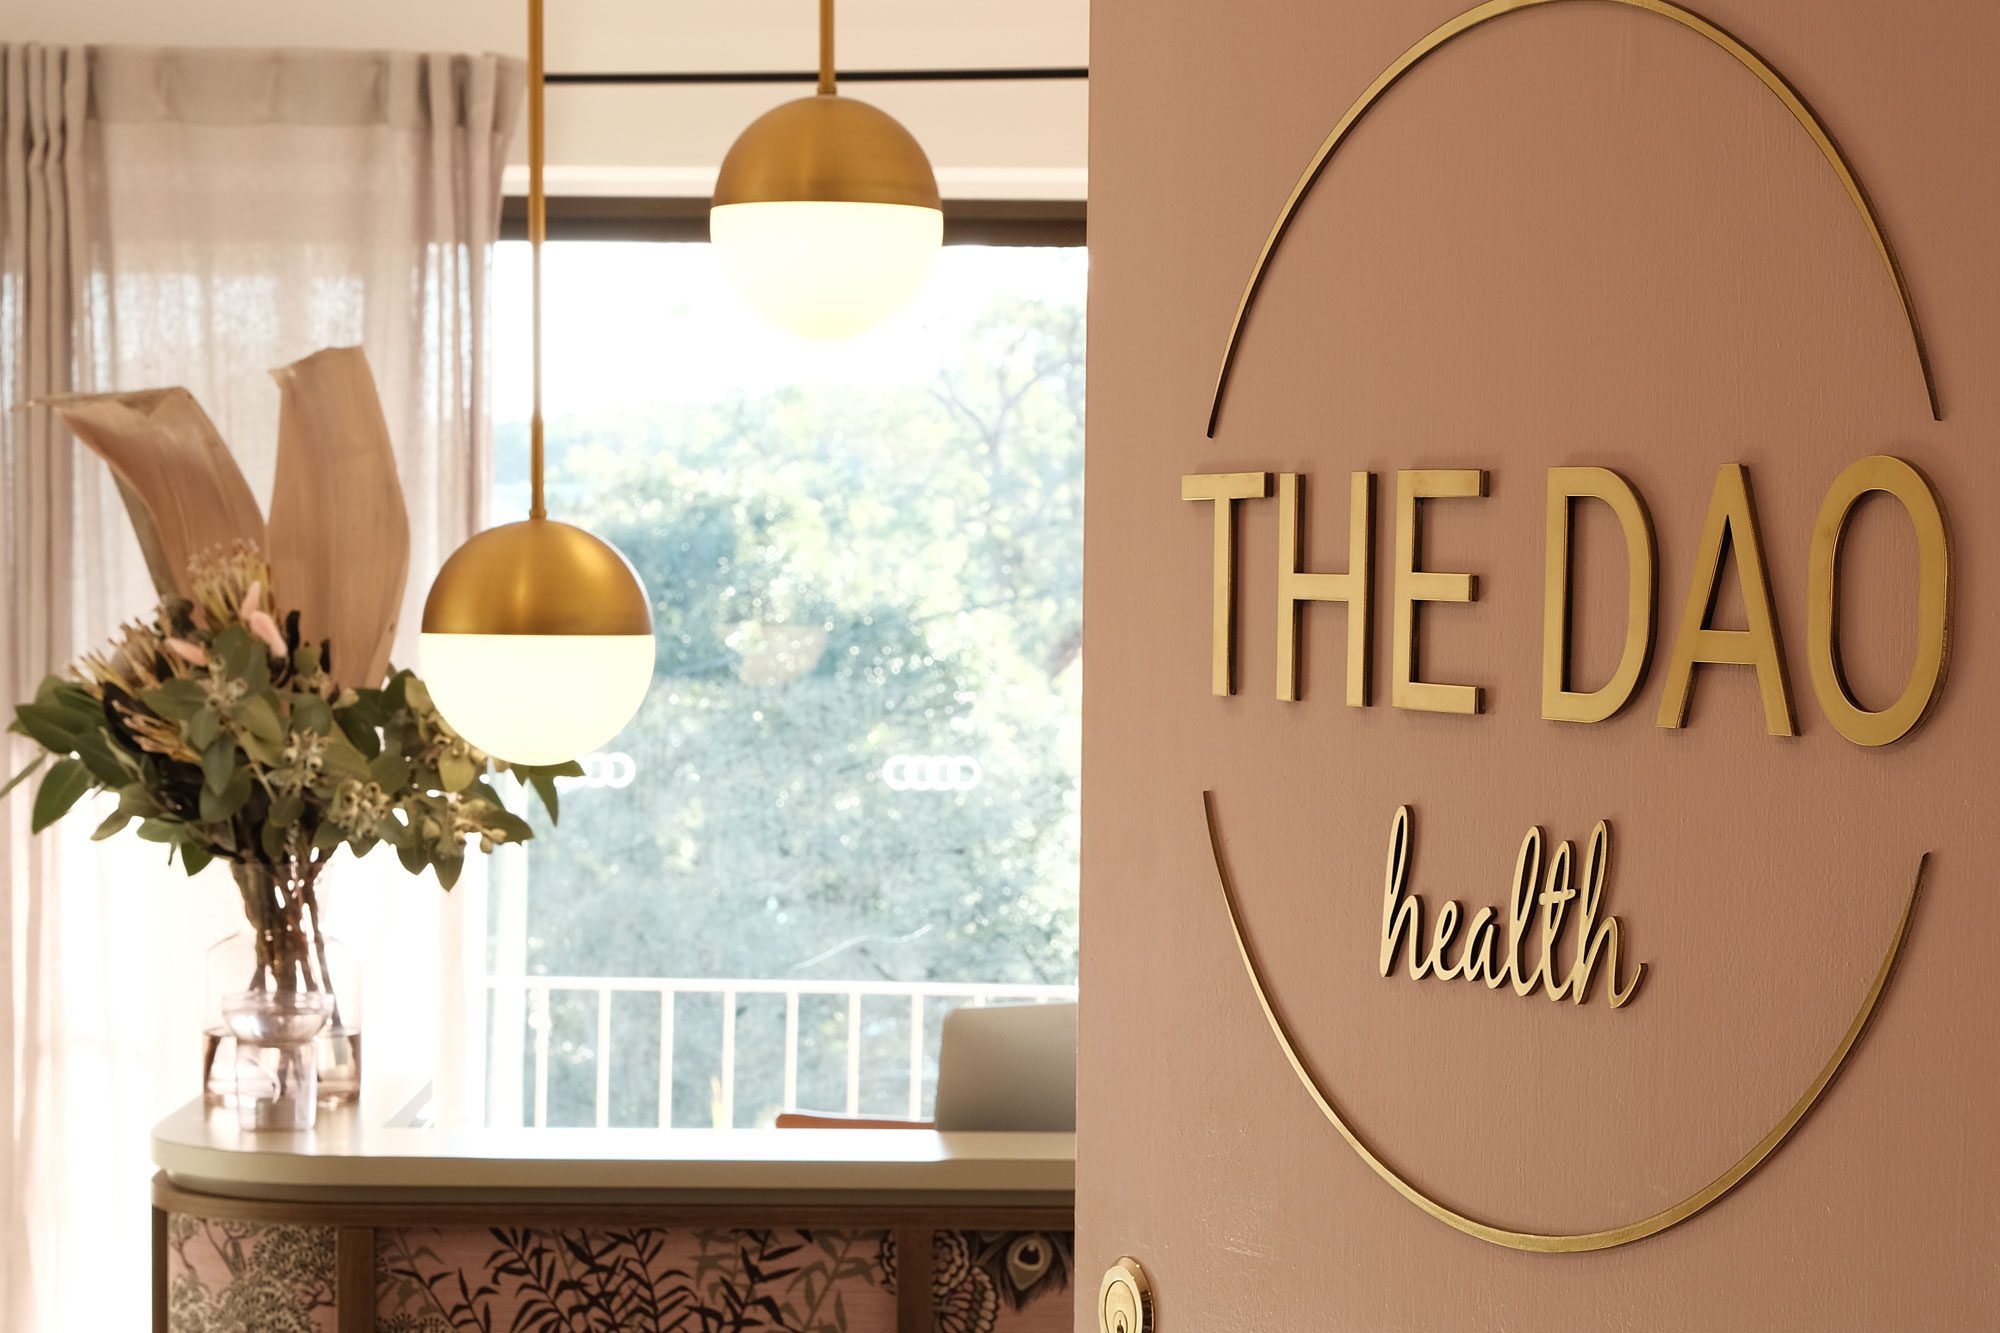 The Dao Health Chinese Medicine Clinic